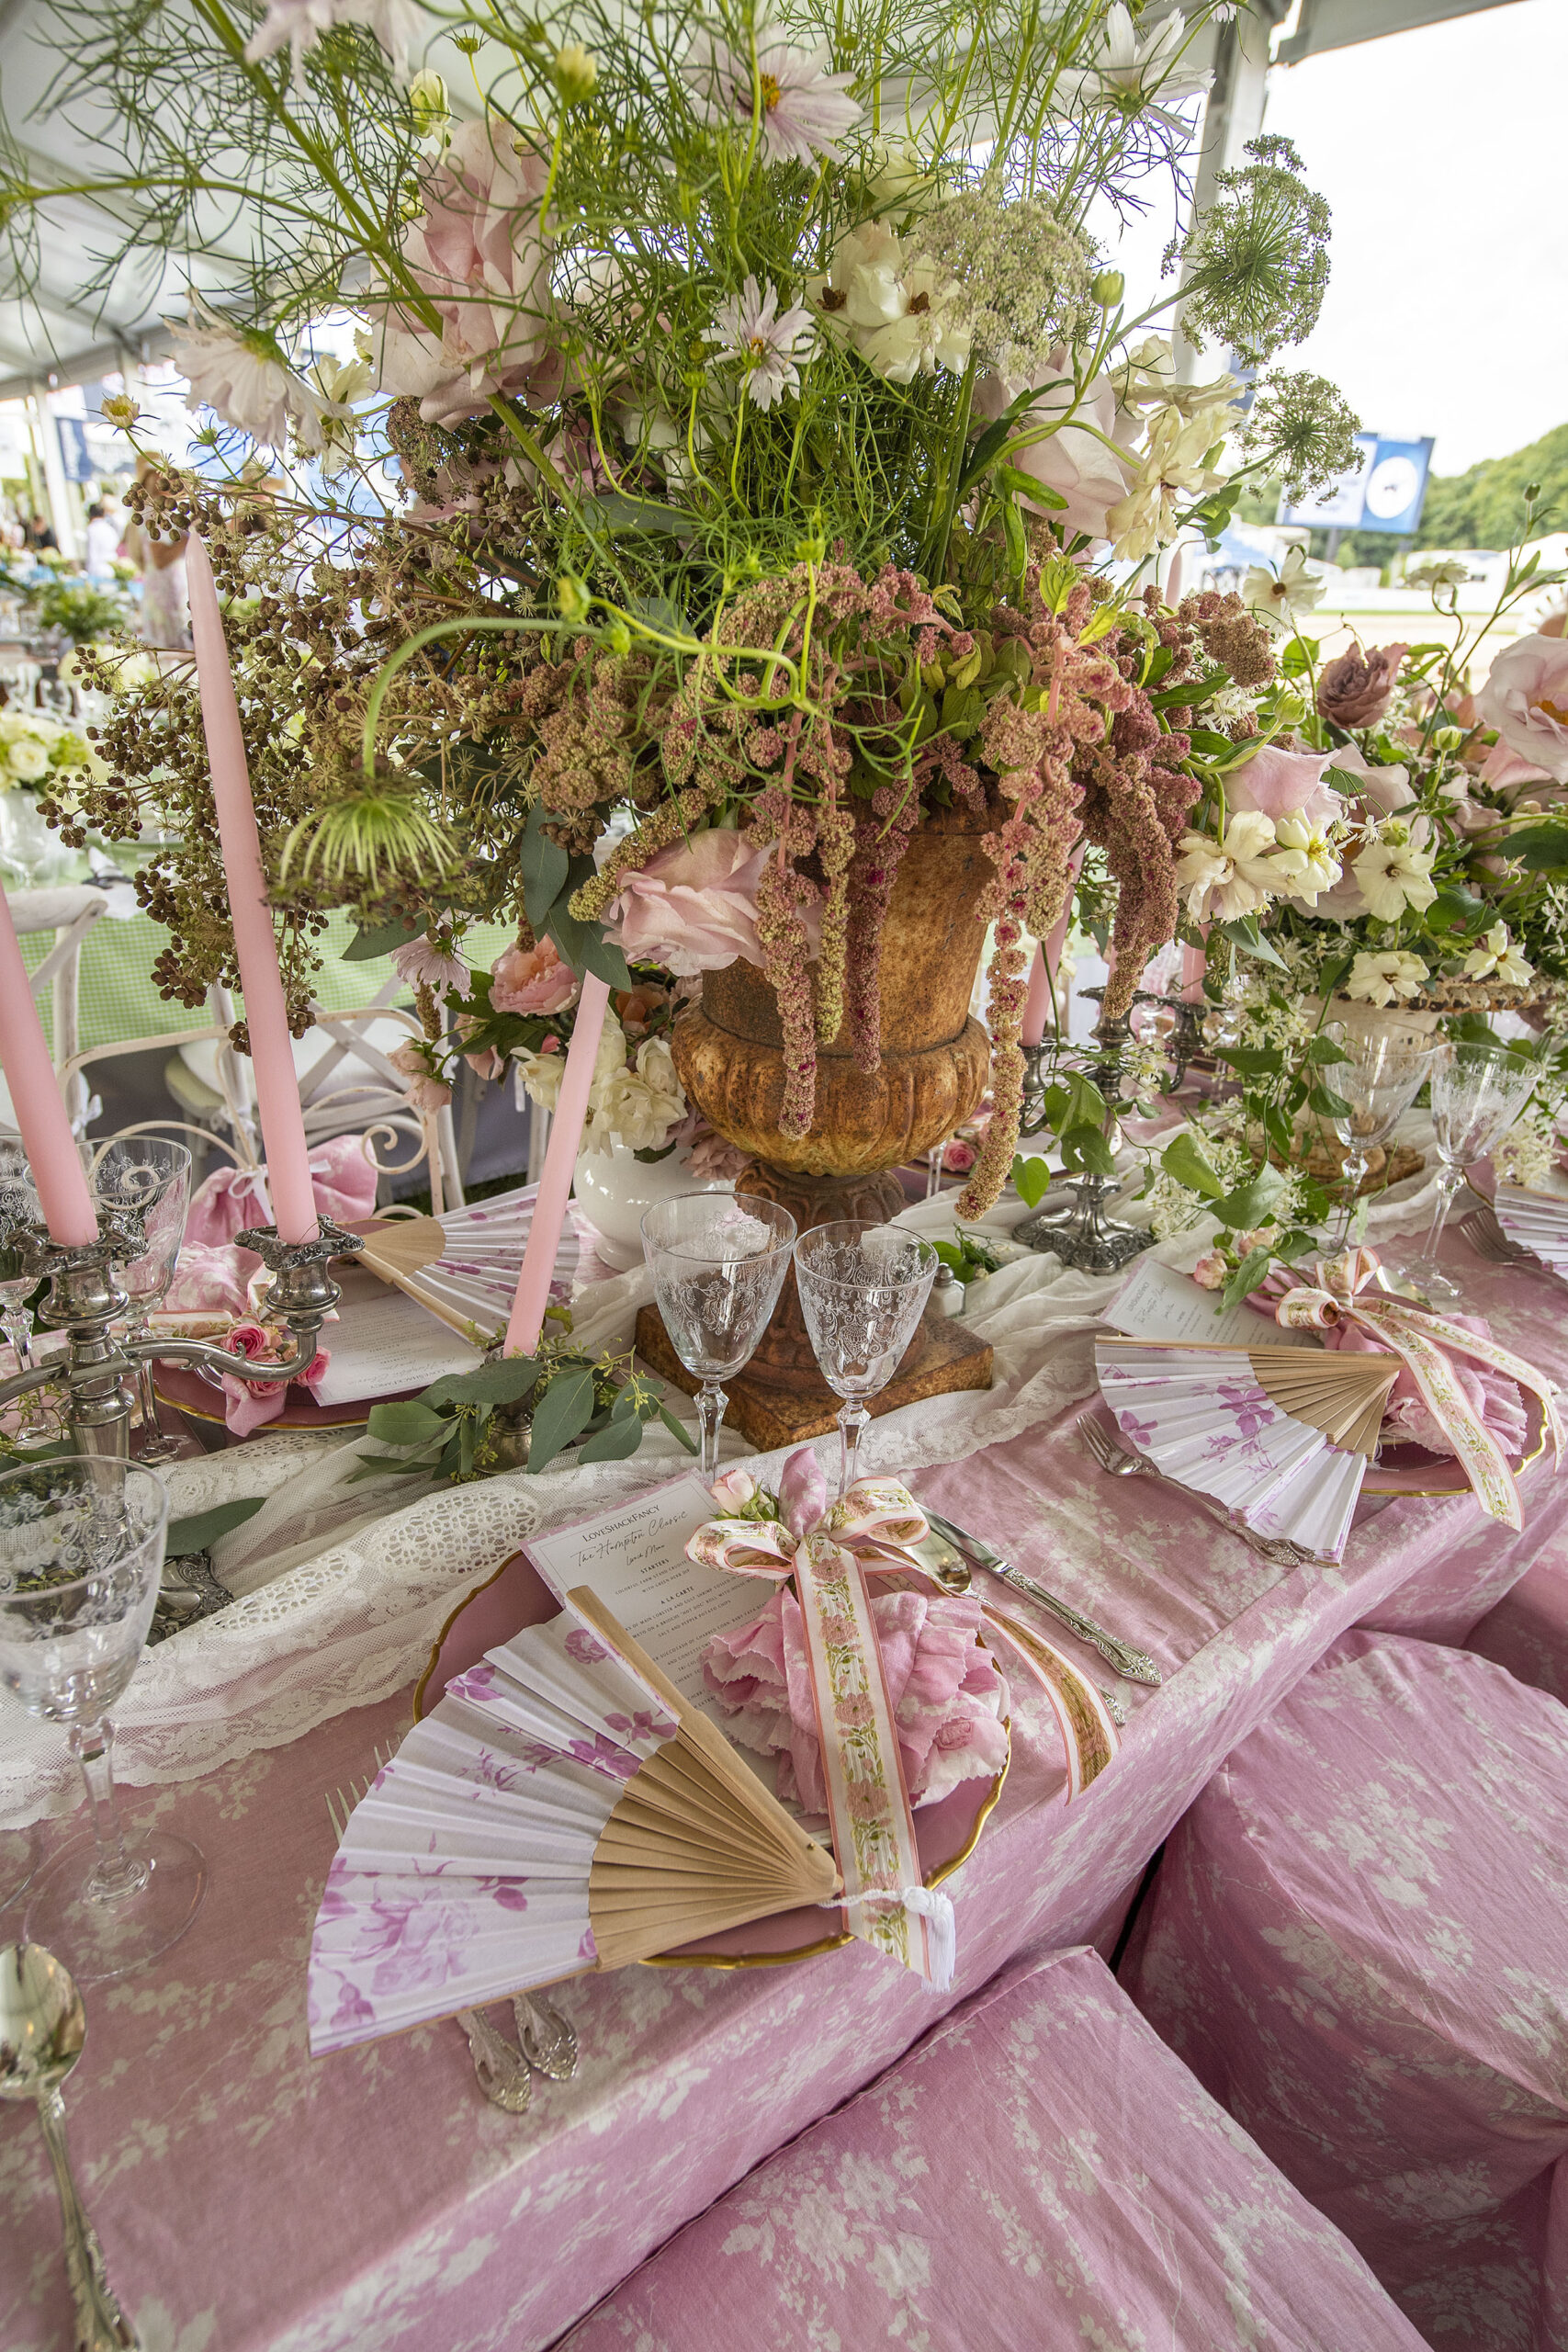 The table setting for LoveShackFancy in the VIP tent at the 2021 Hampton Classic on Grand Prix Sunday, September 5th, 2021